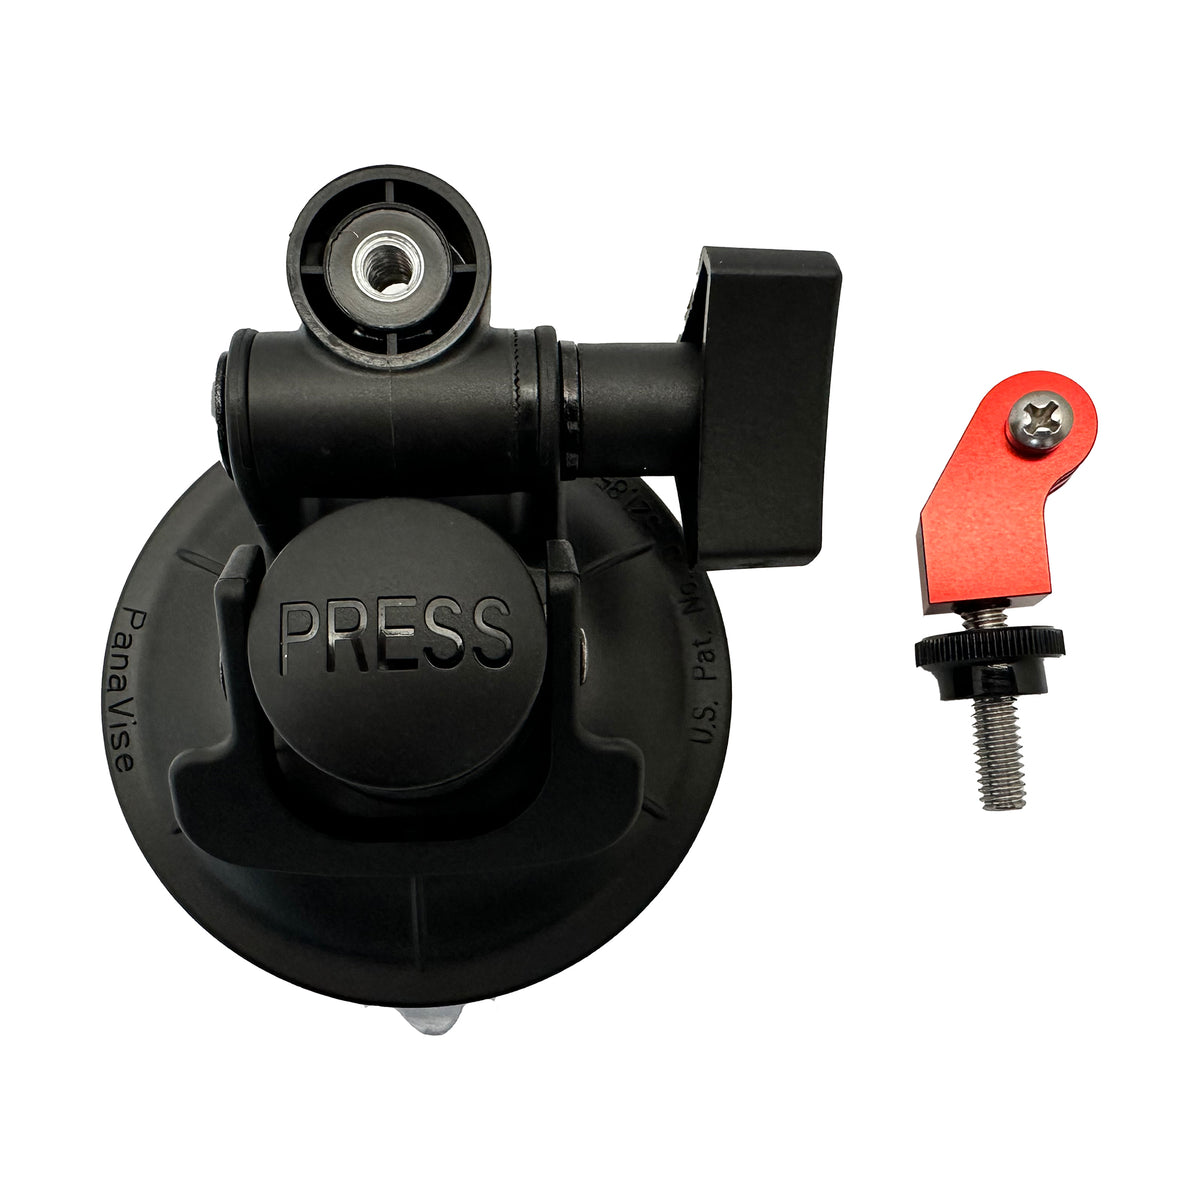 Rock Steady Low Profile Suction Cup Mount